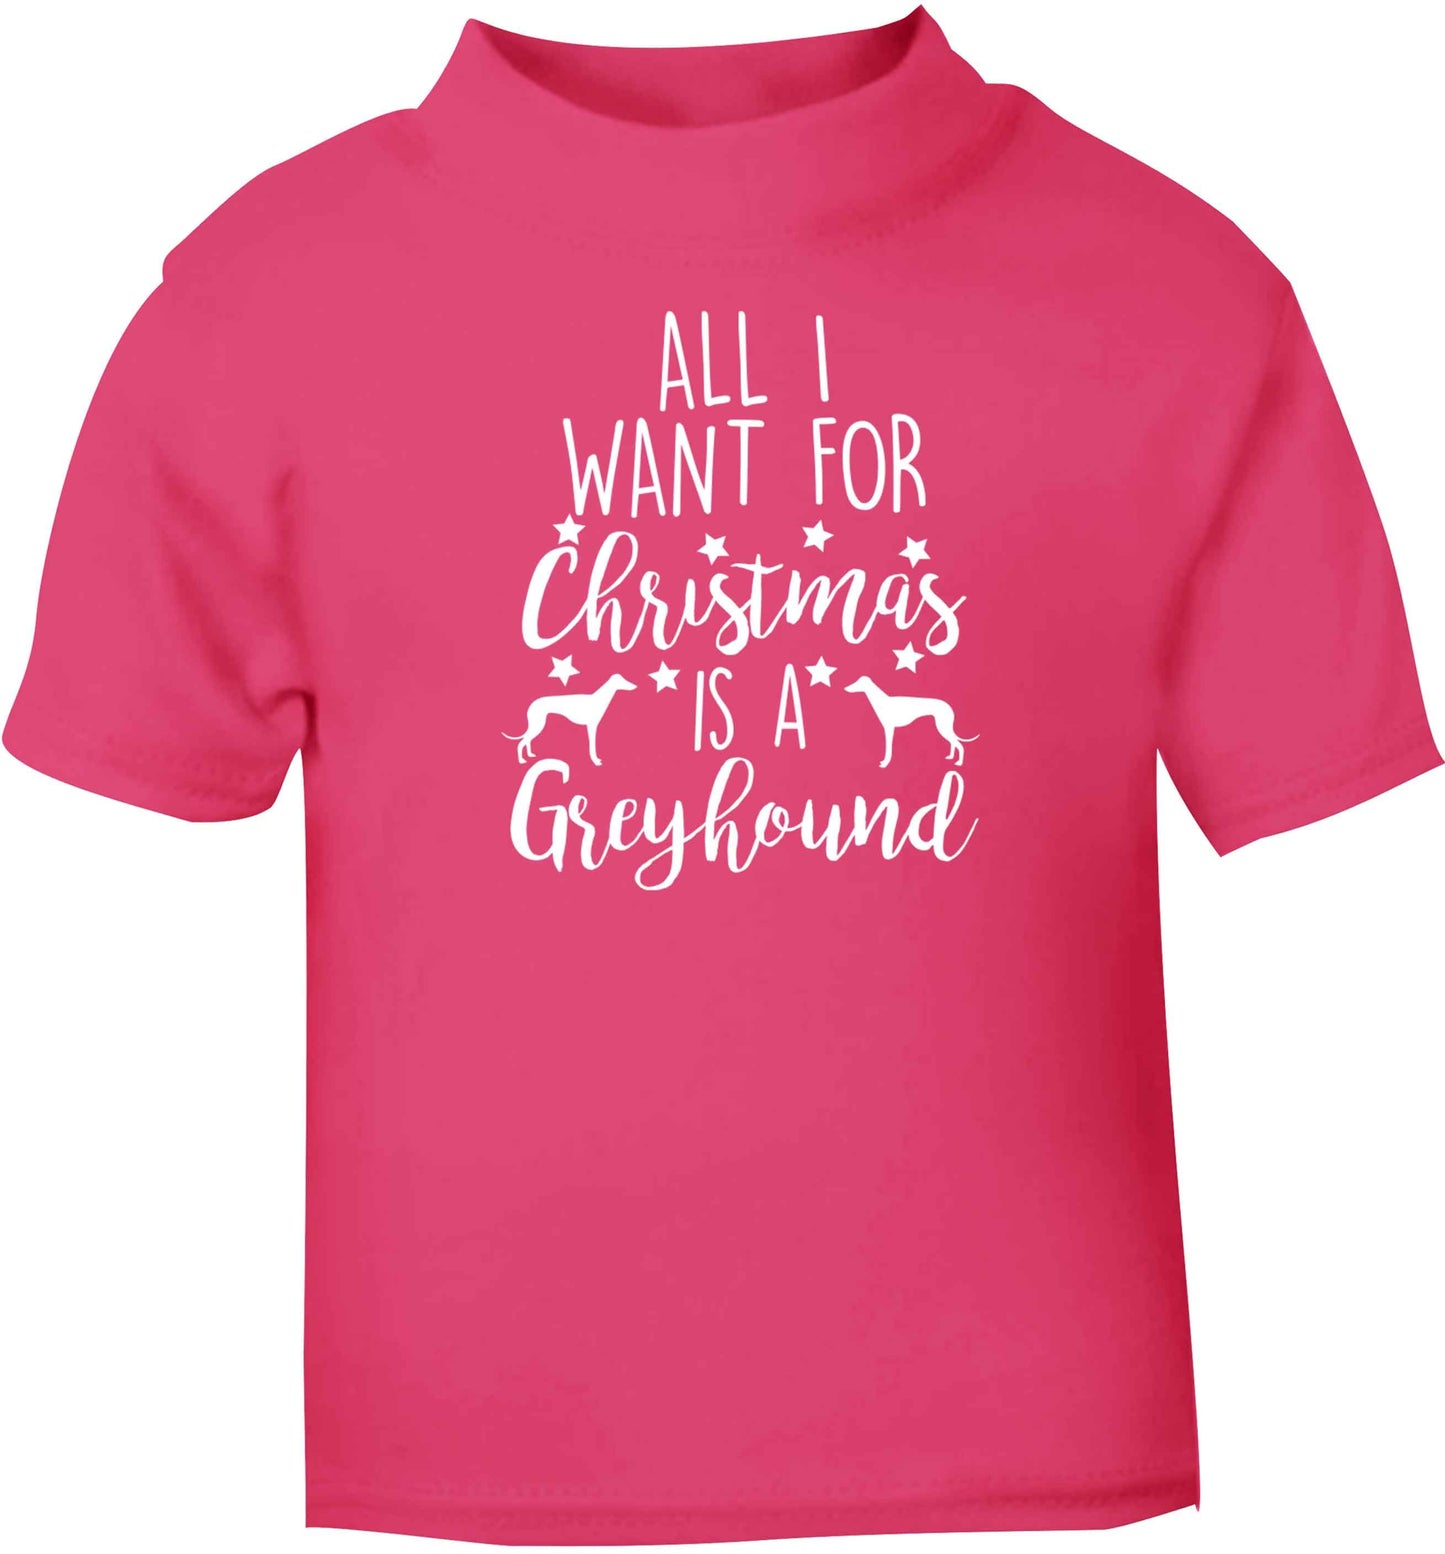 All I want for Christmas is a greyhound pink baby toddler Tshirt 2 Years